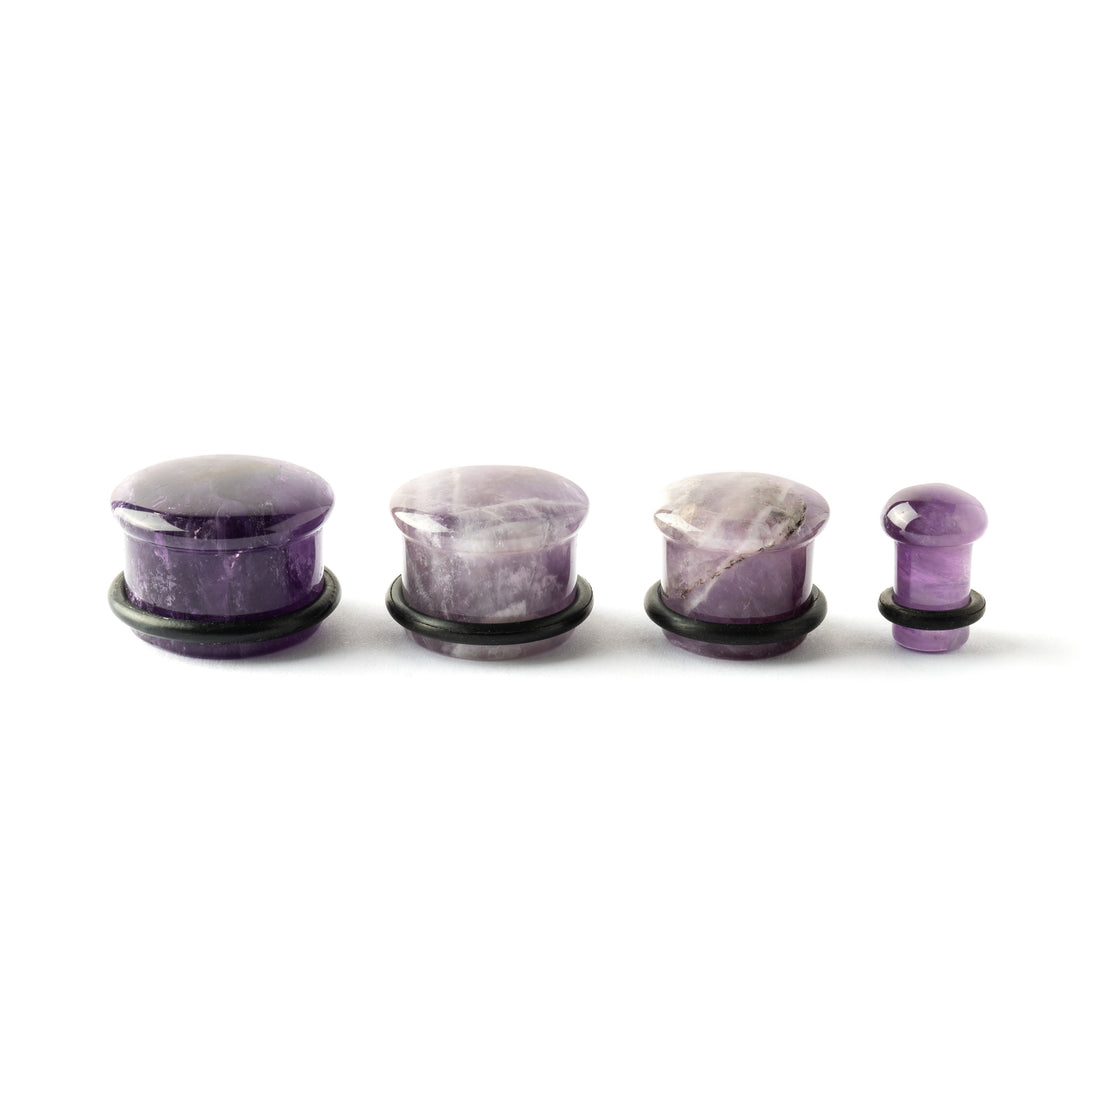 several sizes of Single Flare Amethyst stone ear plugs side and front view